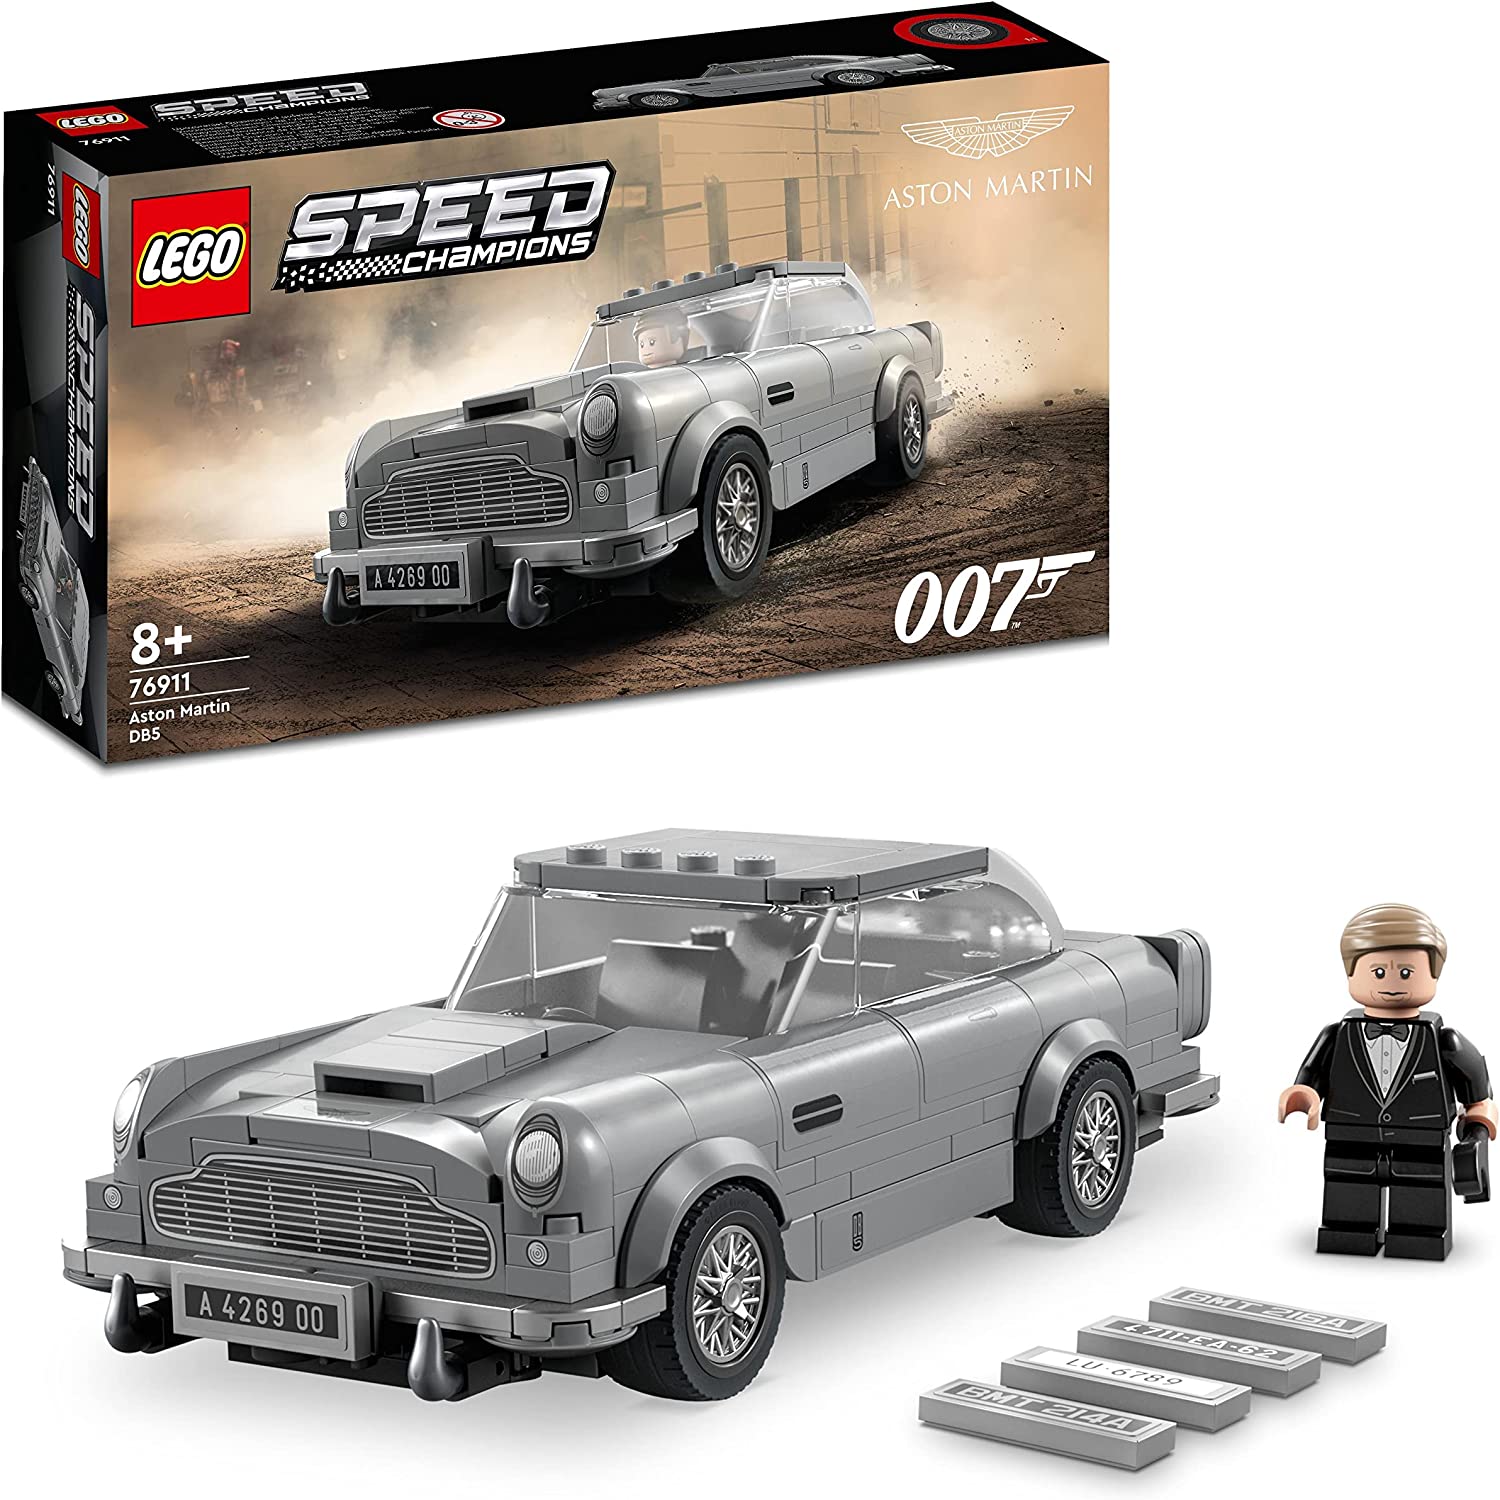 LEGO 76911 Speed Champions 007 Aston Martin DB5, James Bond Toy, Car Model Replica with Mini Figure, No Time to Die, Collectable Set